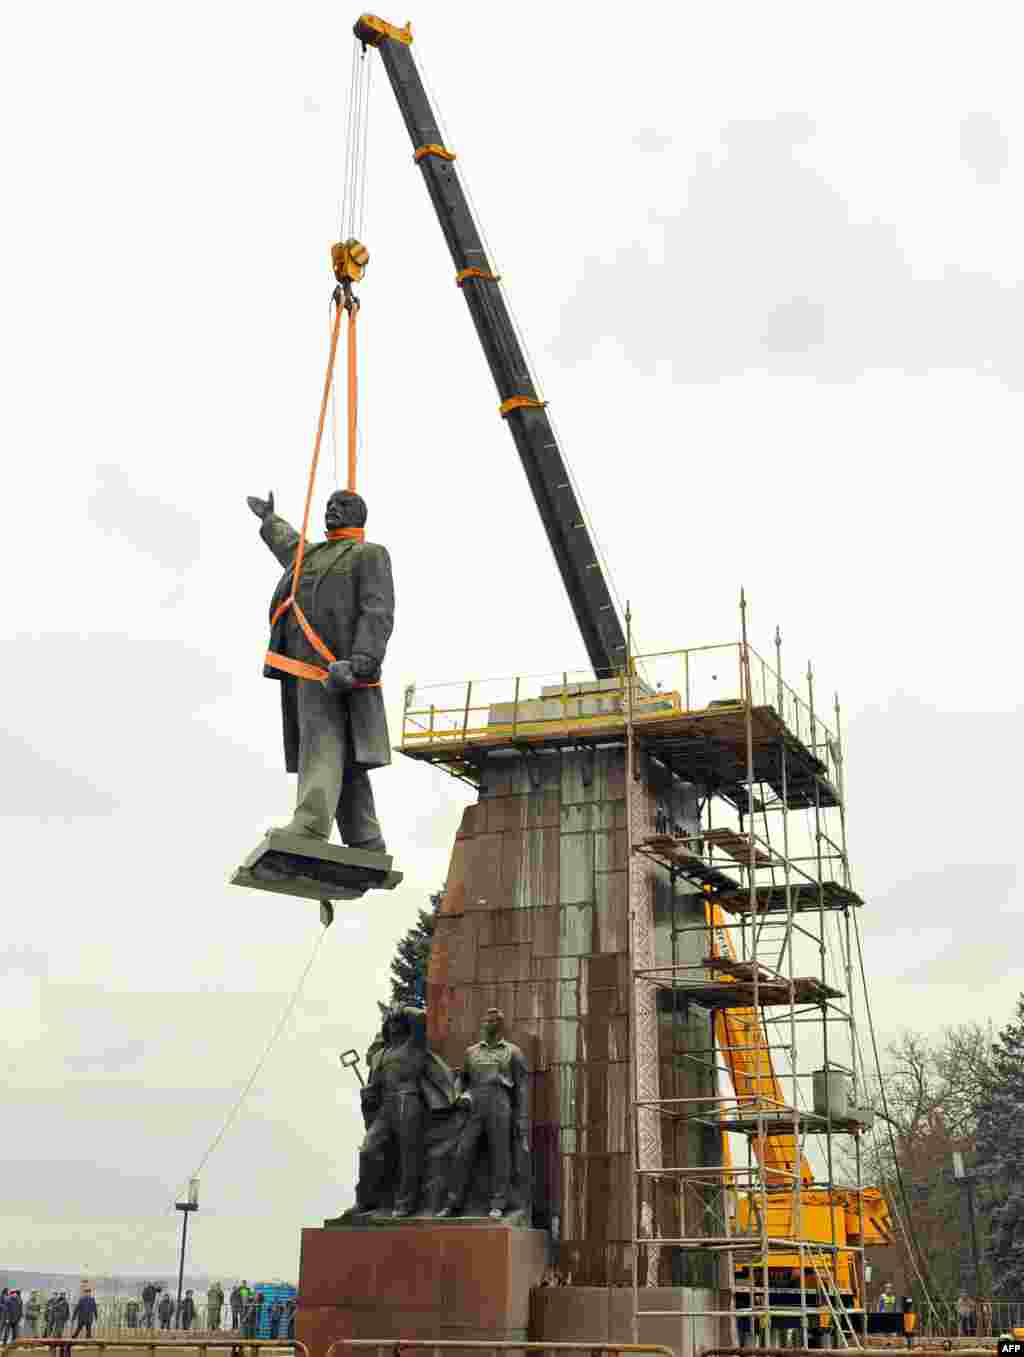 Ukraine -- Workers dismantle a huge Lenin's monument in city of Zaporizhzhya, March 17, 2016